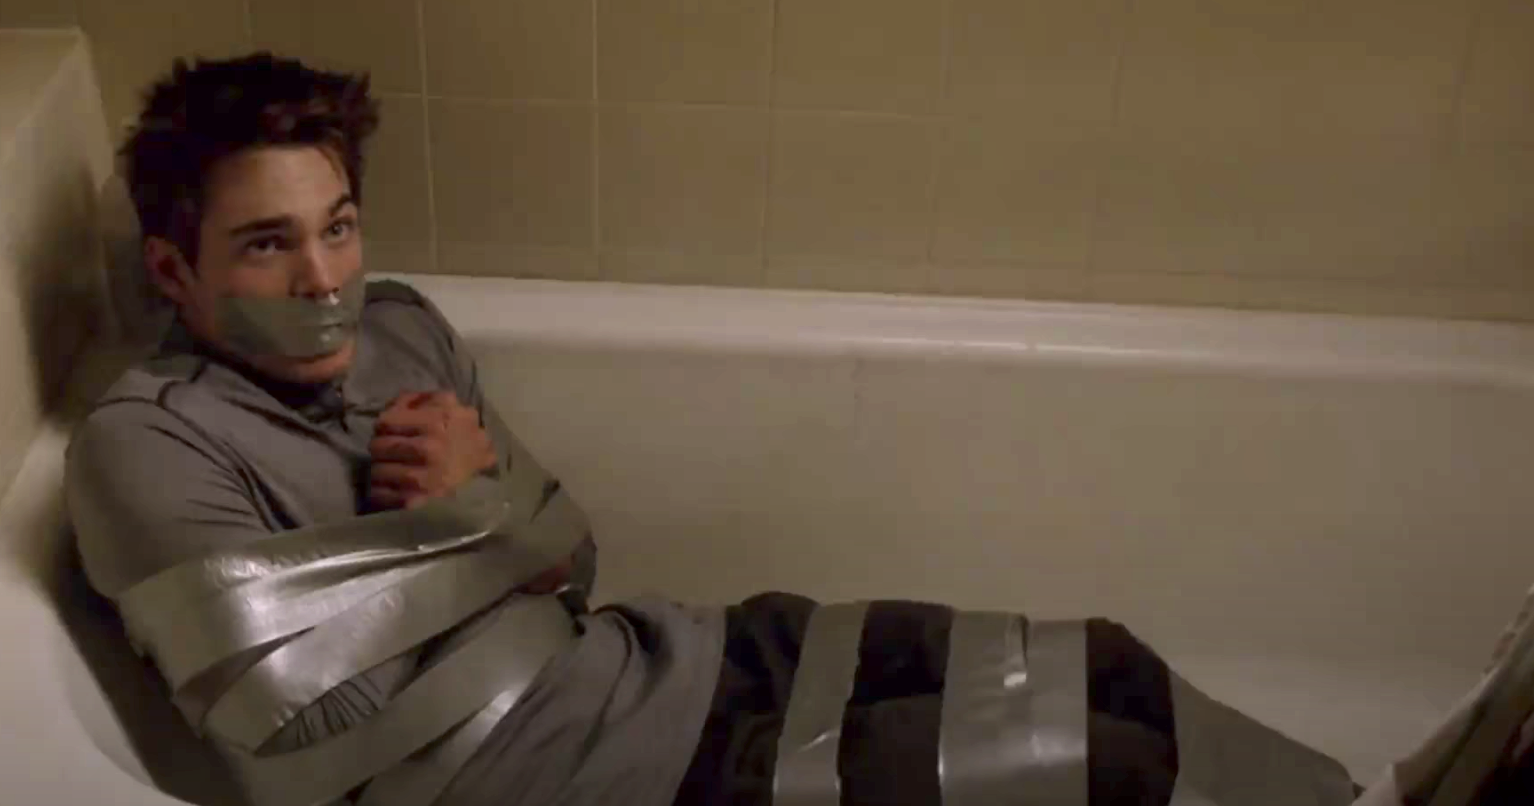 Liam duct taped in the tub